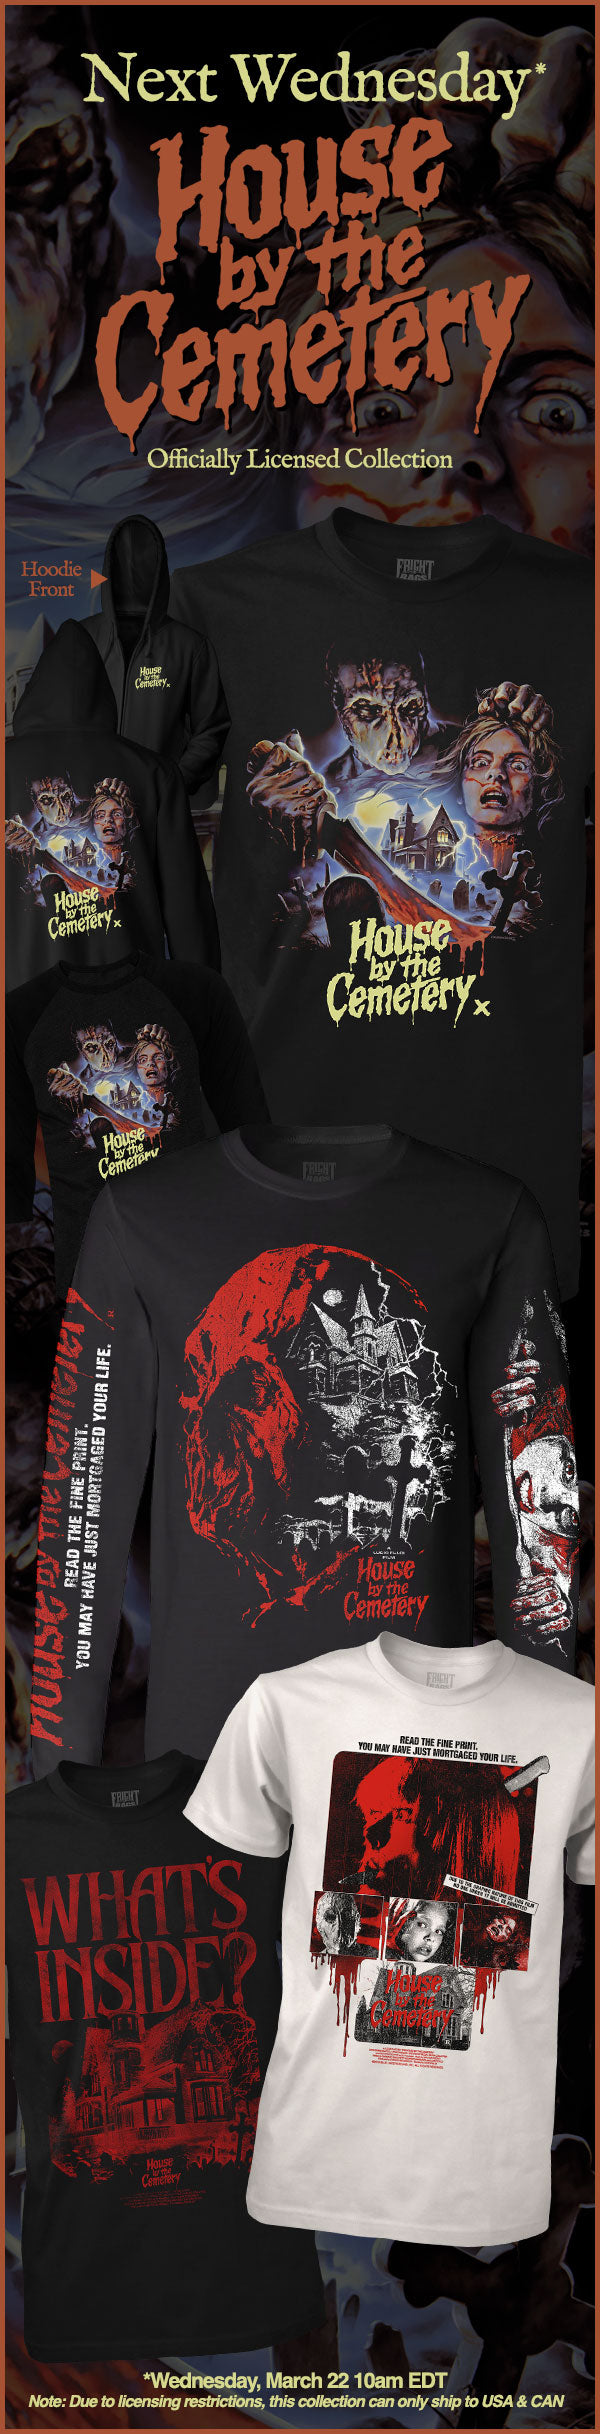 Officially Licensed House By The Cemetery Collection